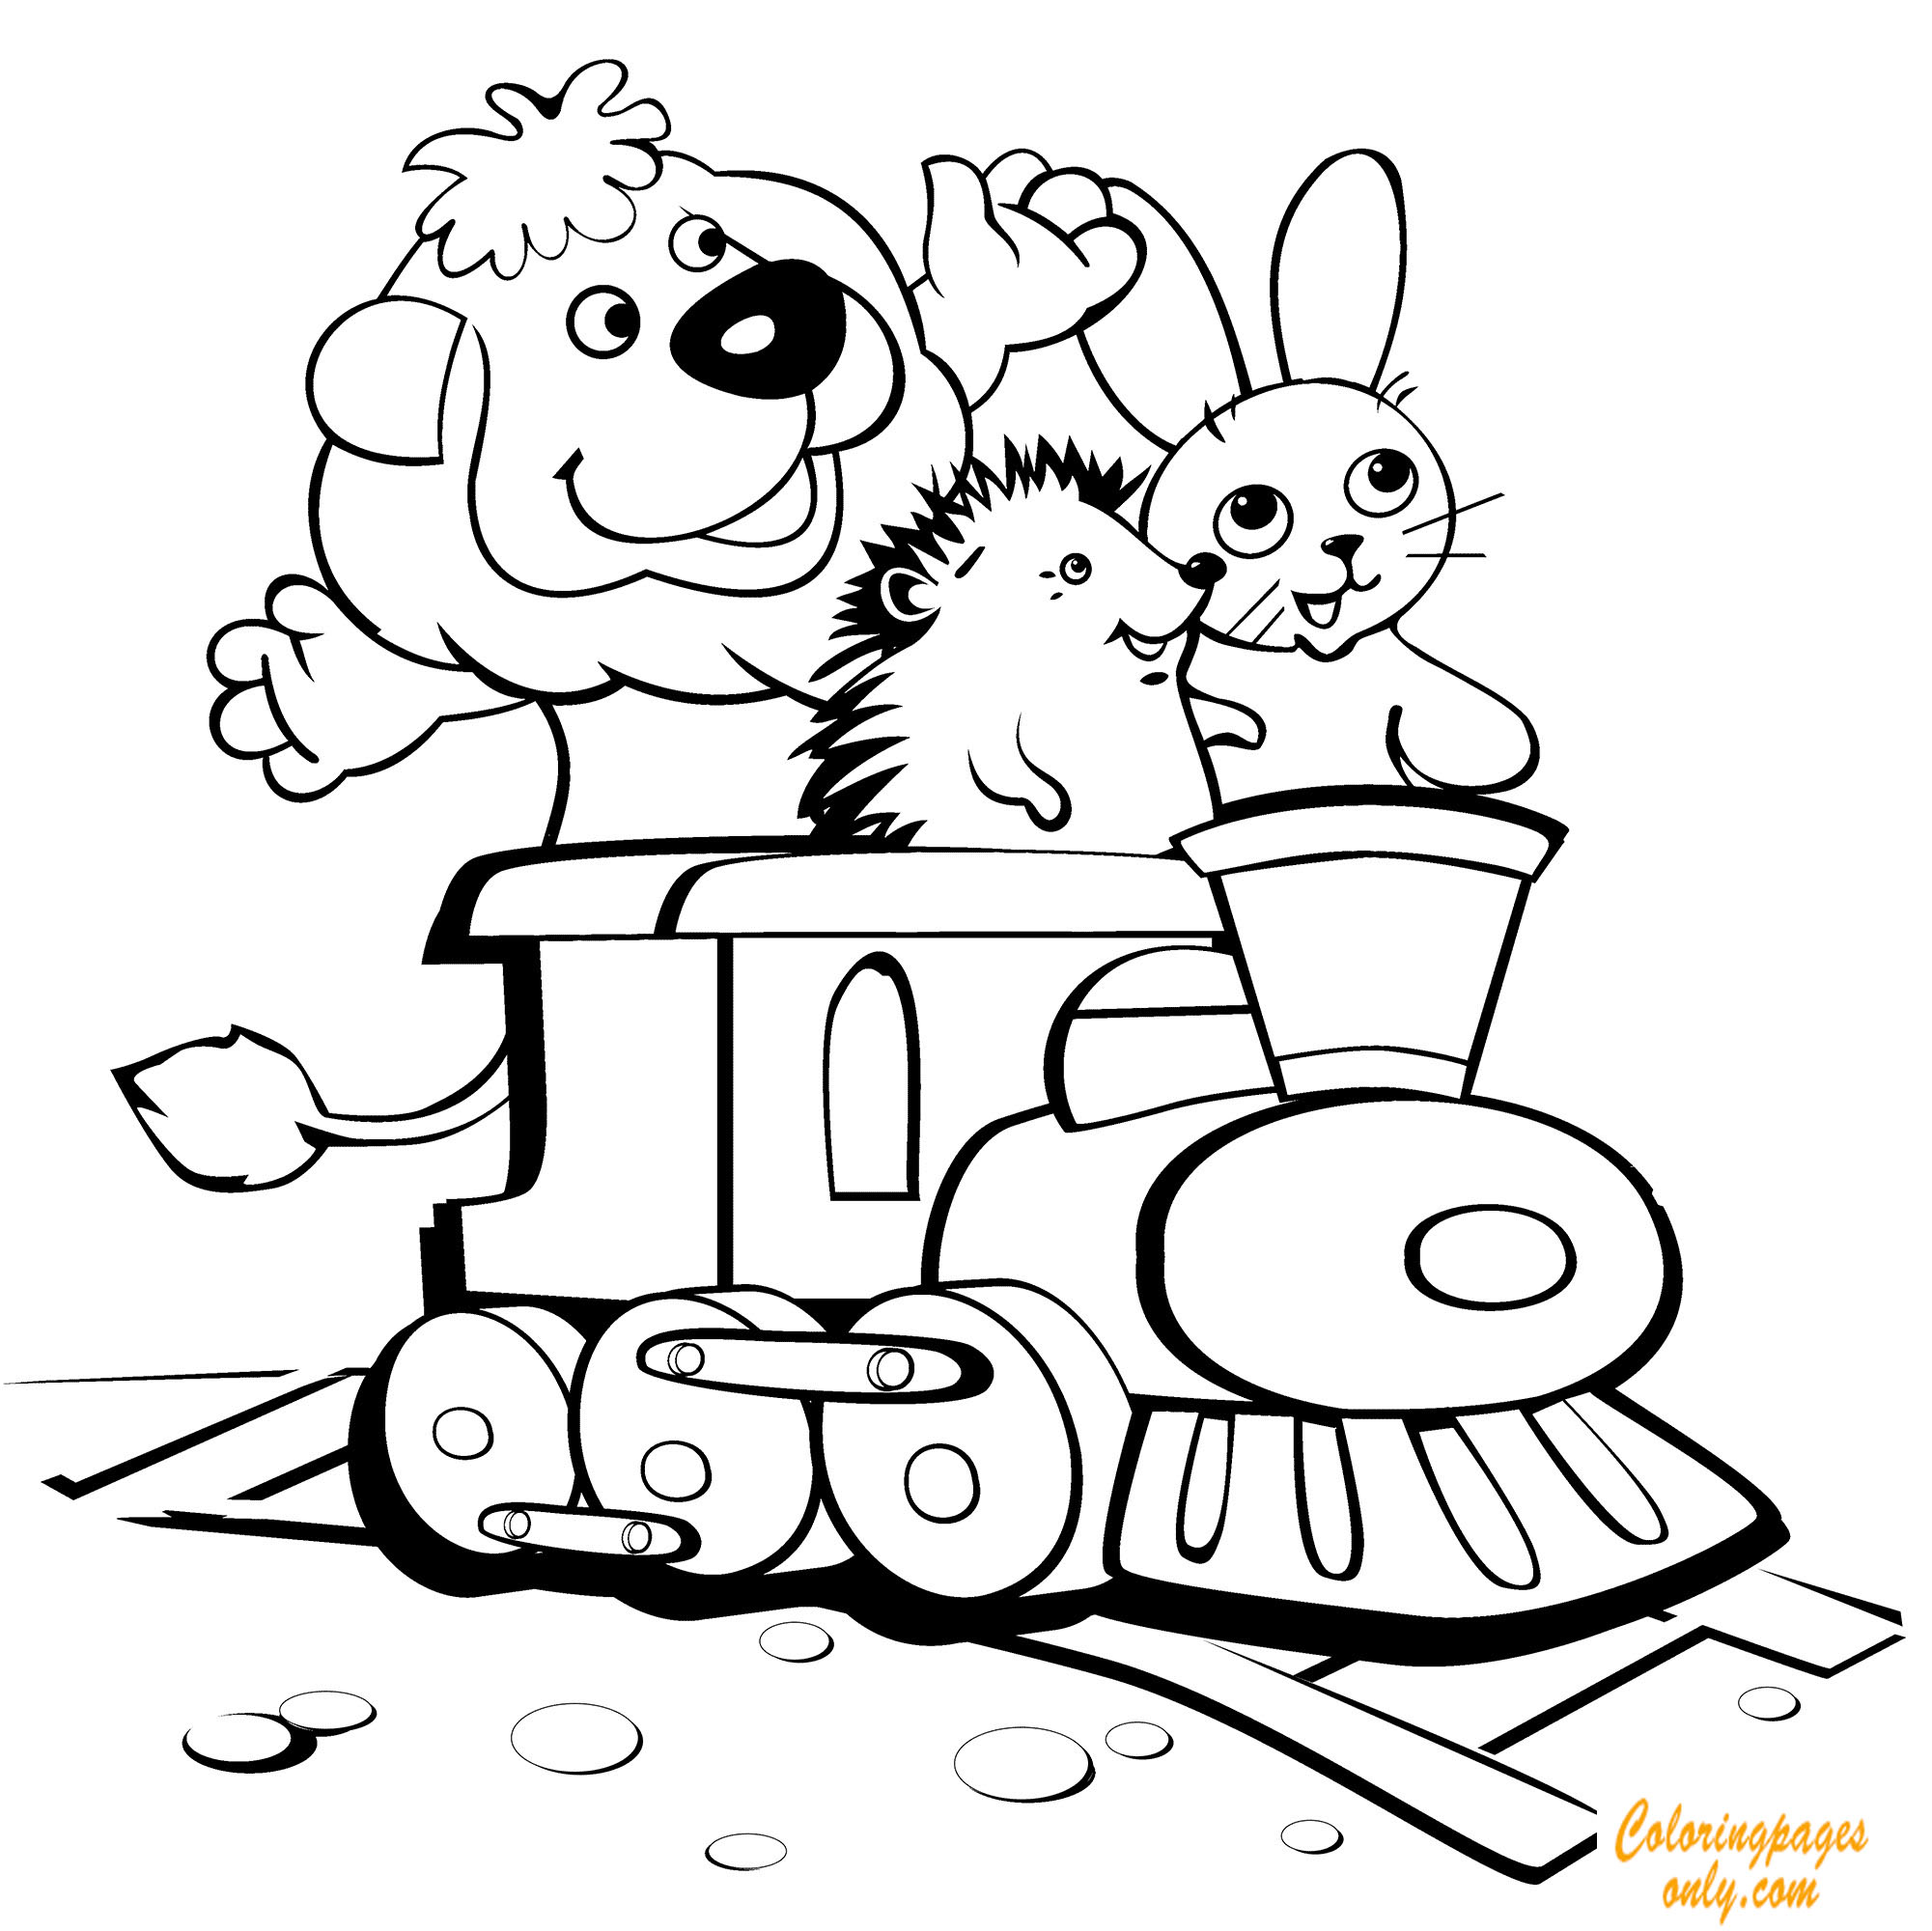 Lion, Hedgehog And Rabbit On The Train Coloring Pages